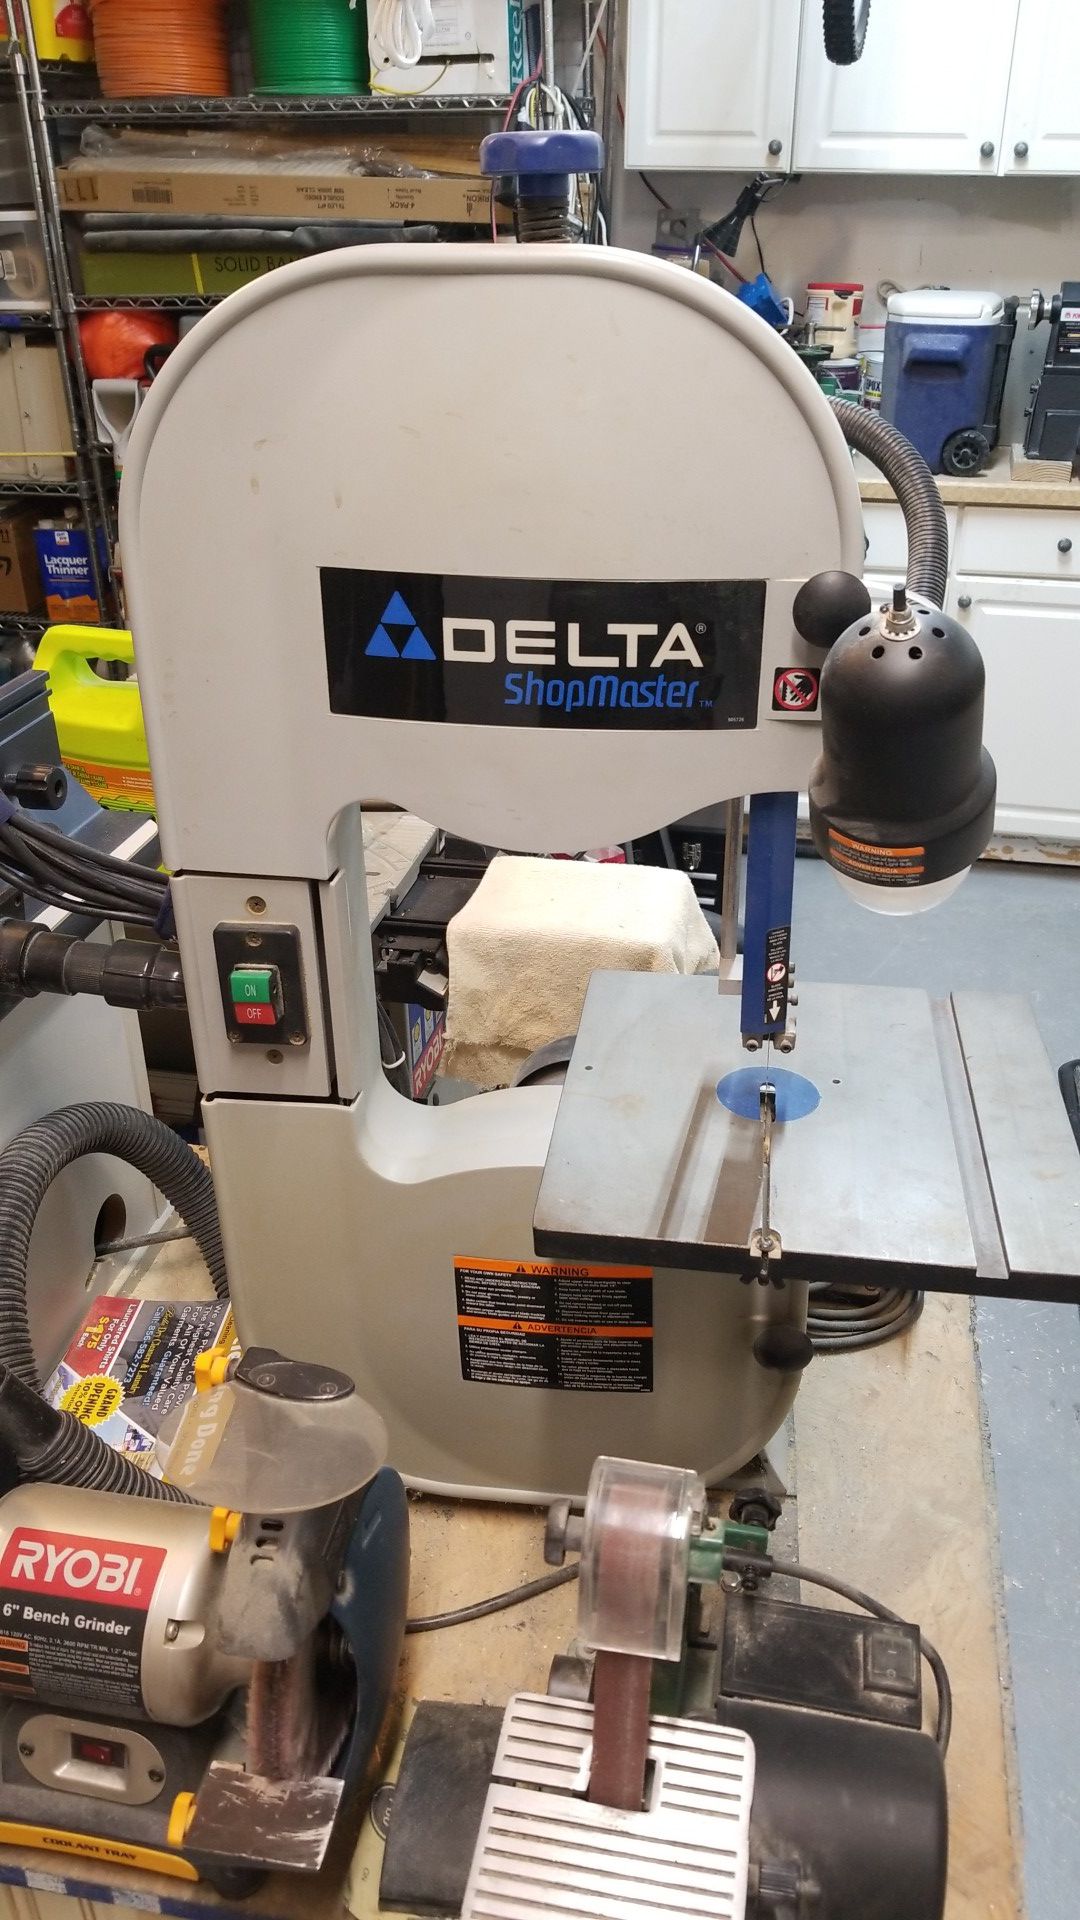 Delta Shopmaster 10 inch band saw bs150ls, 2 extra blades and miter